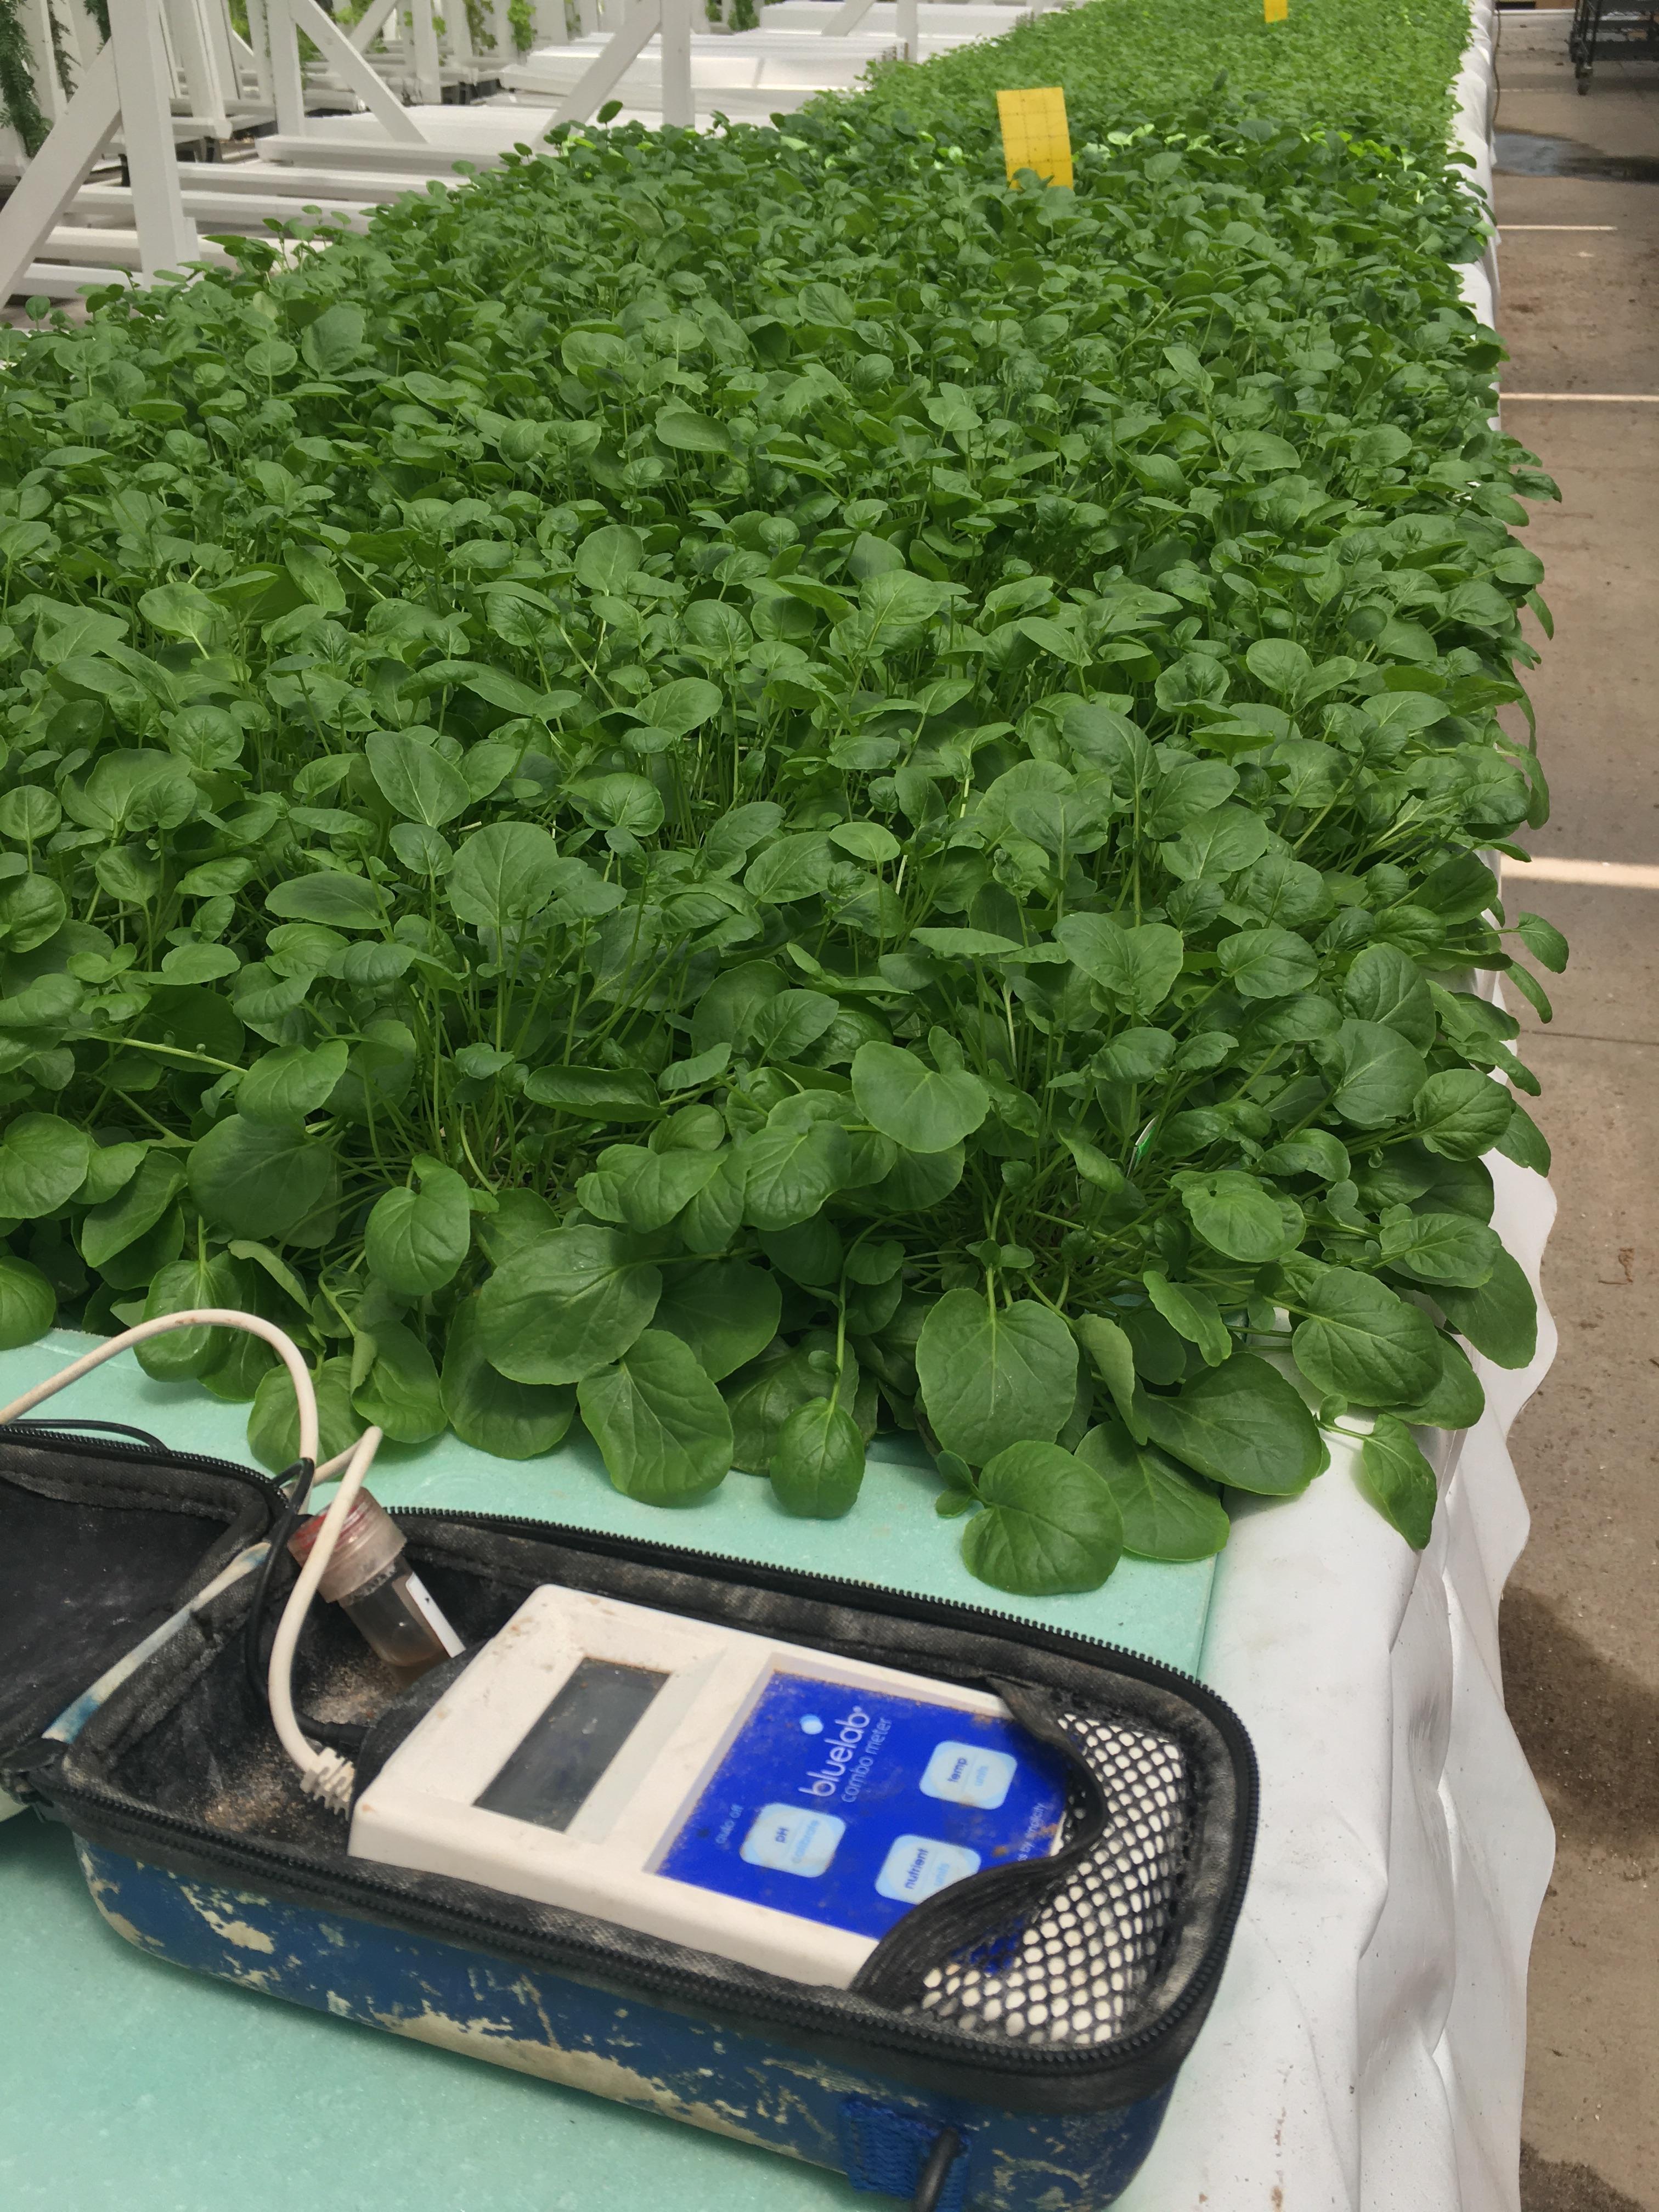 Bluelab Combo Meter in use at CRG Grow